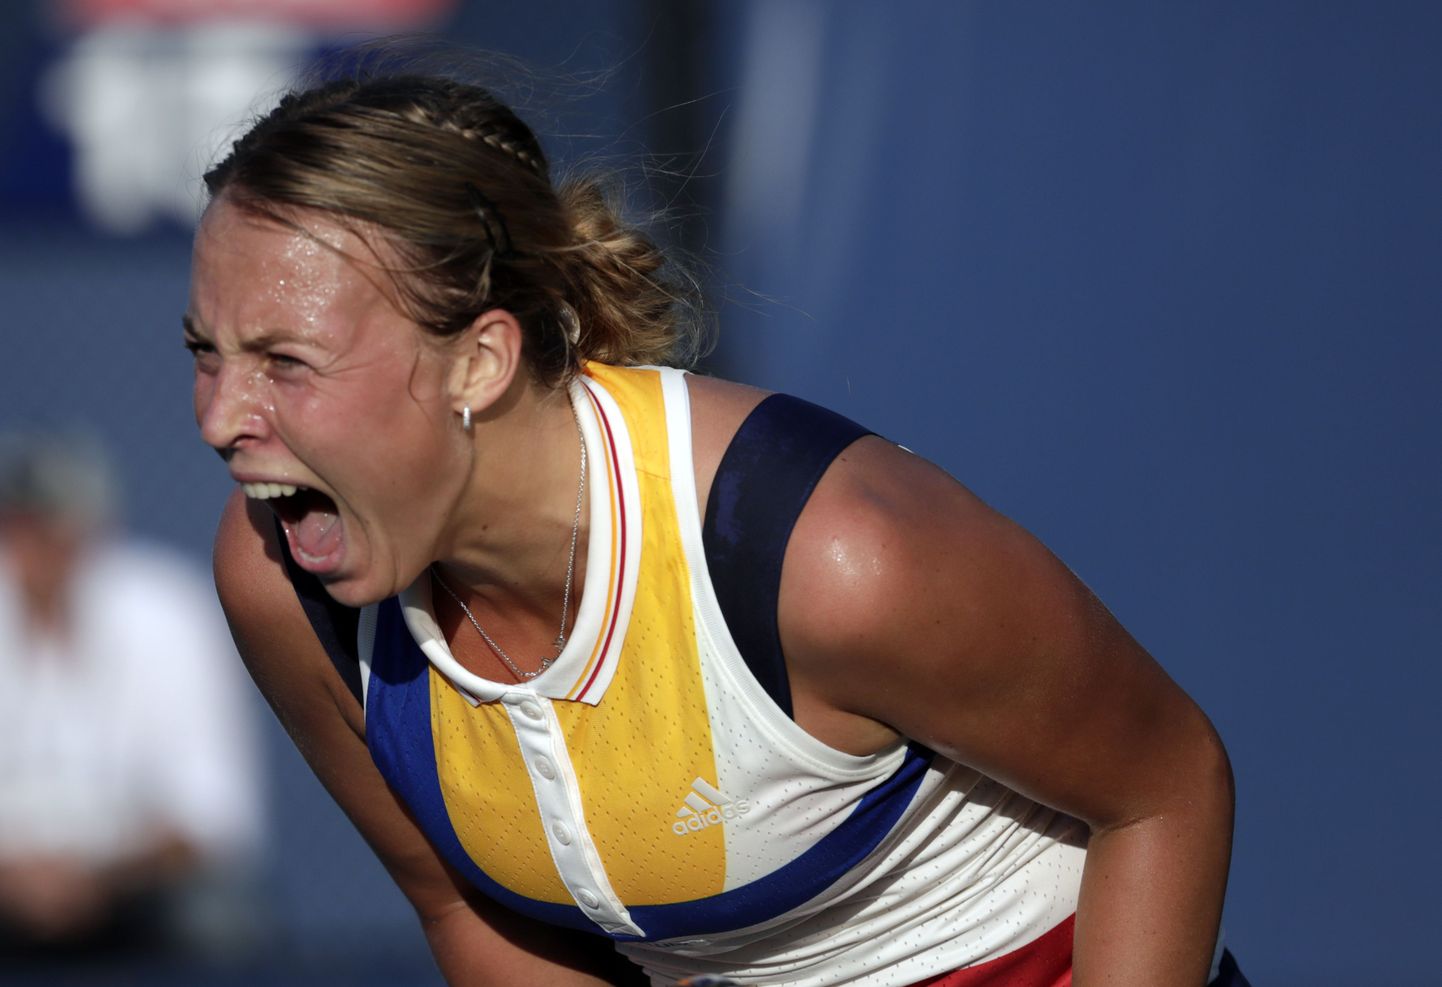 Anett Kontaveit, of Estonia, reacts after scoring a point against Lucie Safarova, of Czech Republic, during the first round of the U.S. Open tennis tournament, Wednesday, Aug. 30, 2017, in New York. (AP Photo/Julio Cortez)